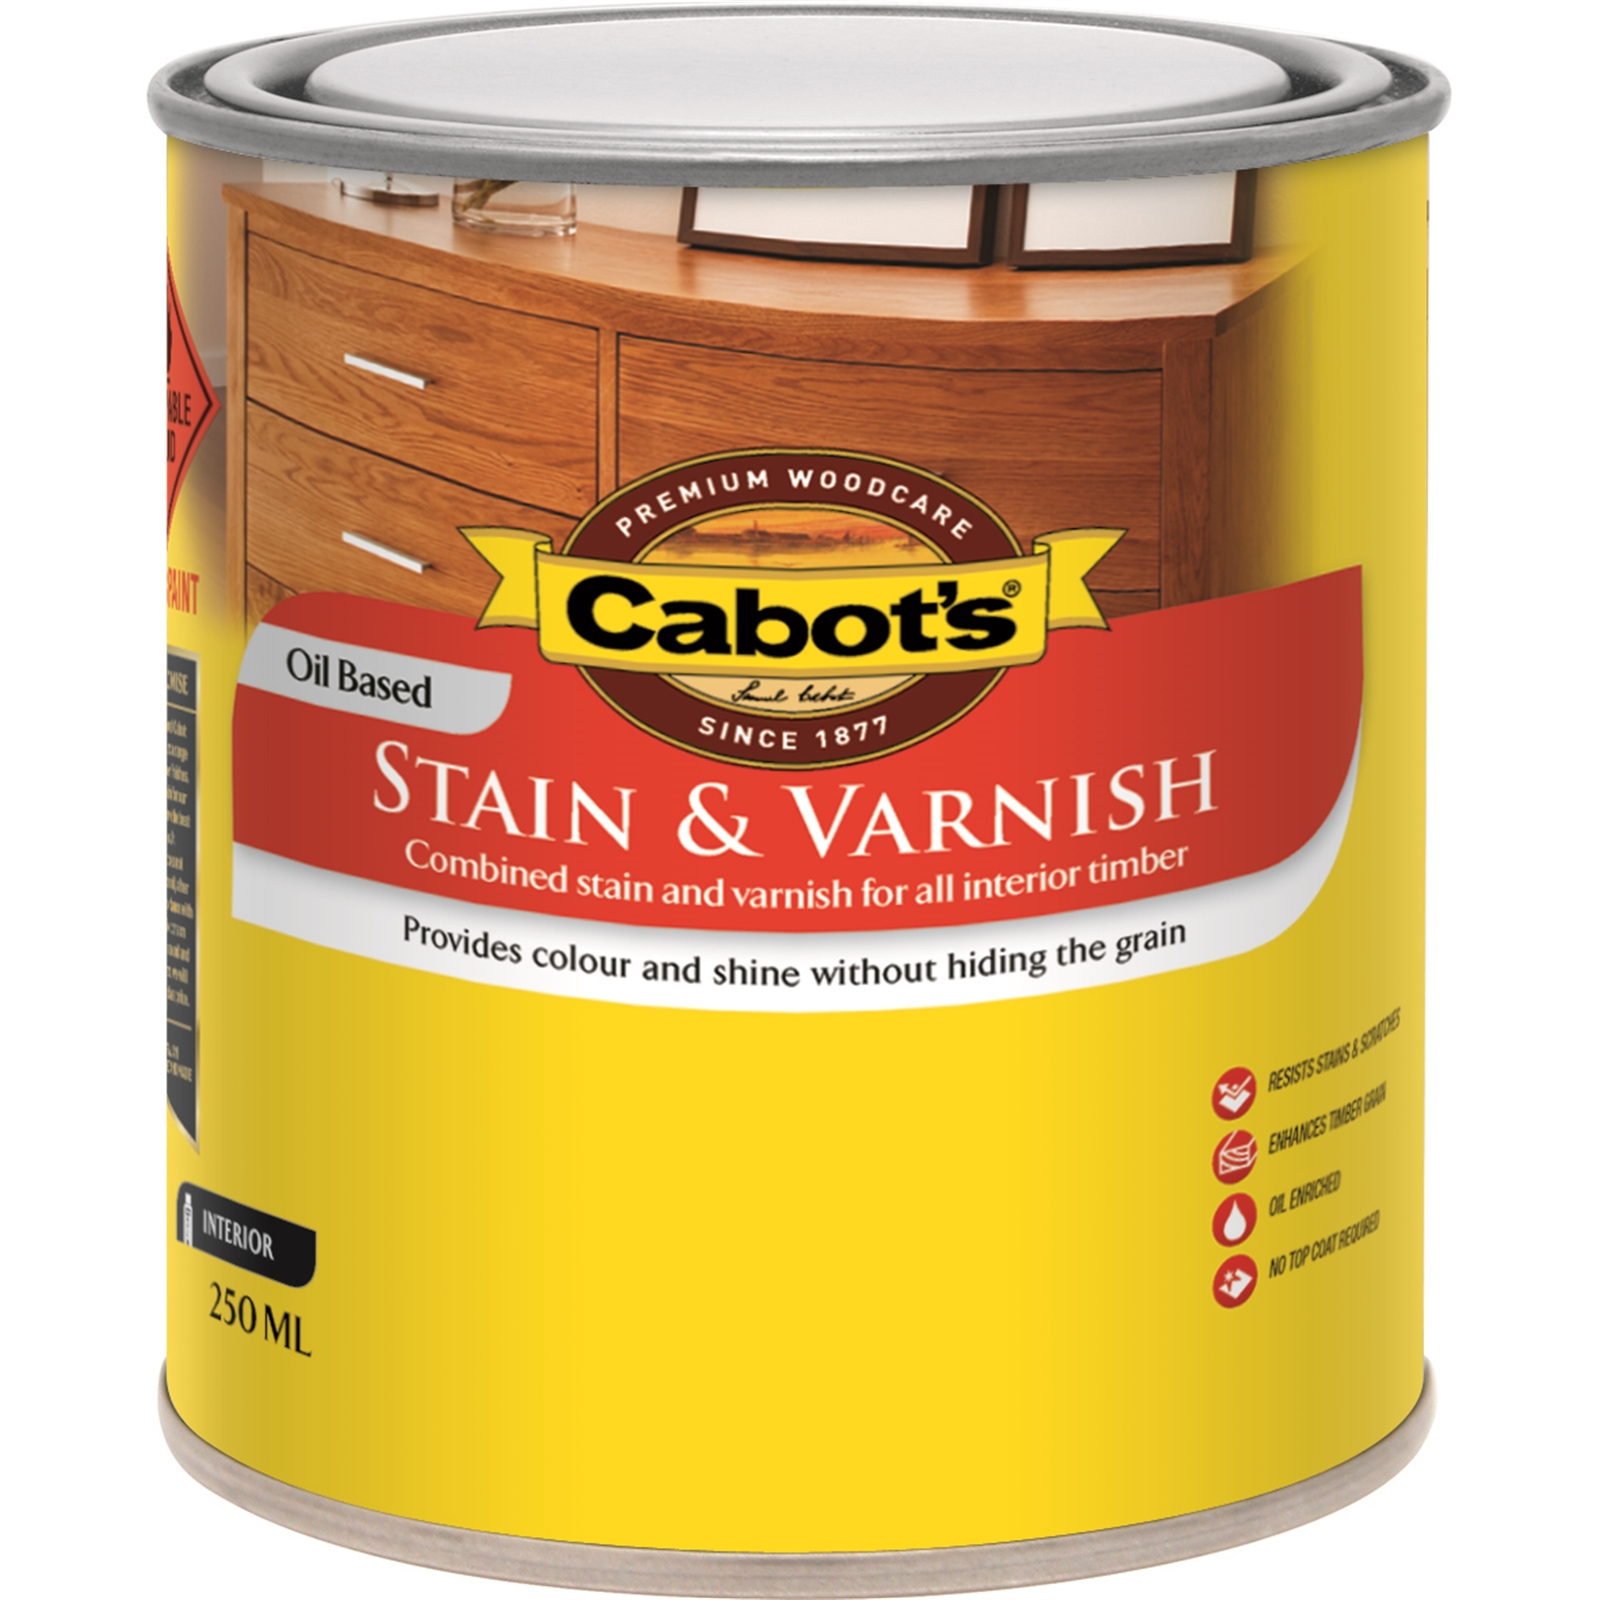 Cabot's 250ml Satin Oil Based Walnut Stain and Varnish